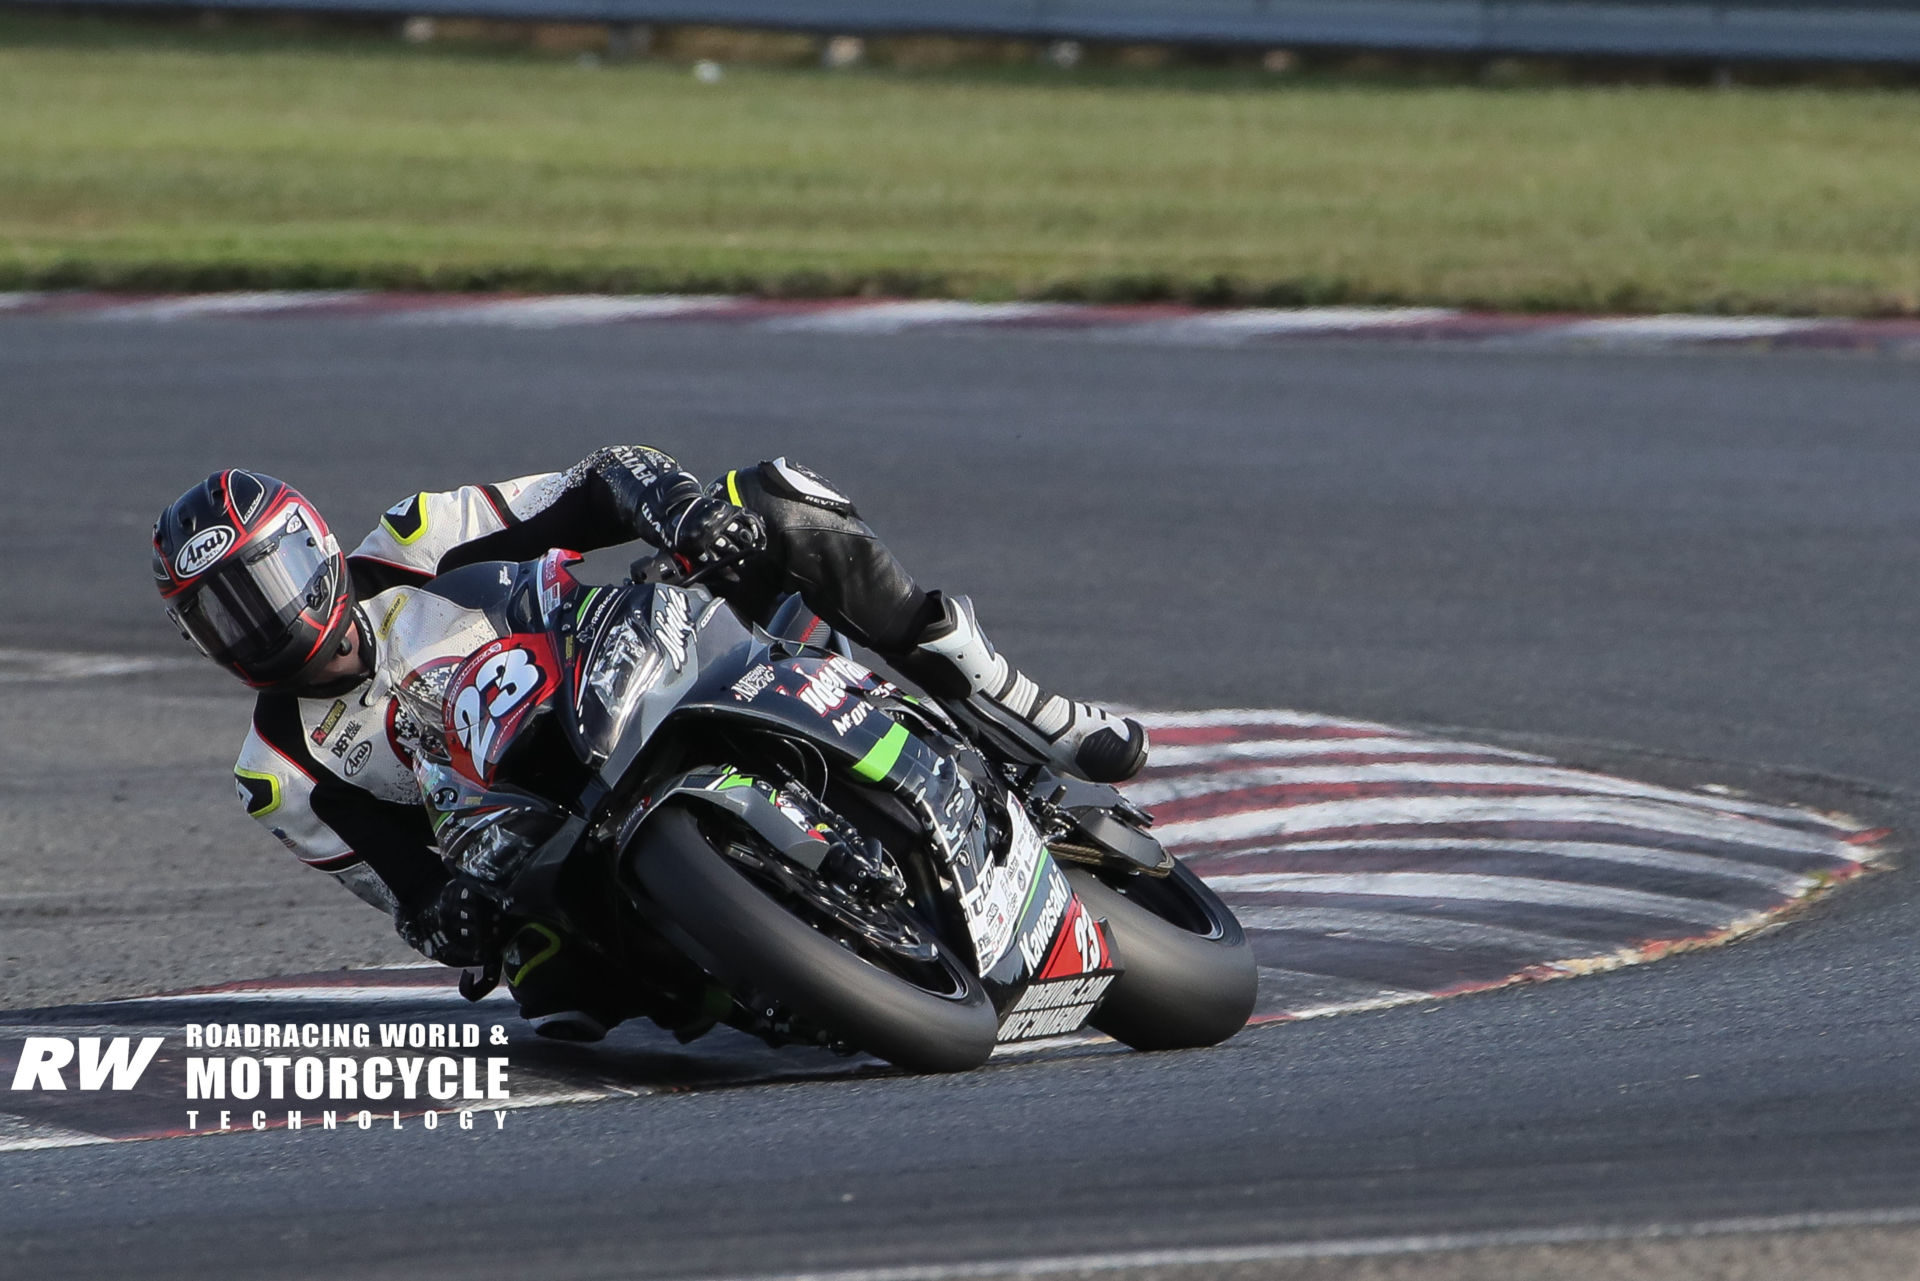 Corey Alexander (23) at speed on his RideHVMC Kawasaki ZX-10R at New Jersey Motorsports Park in 2019. Photo by Brian J. Nelson.